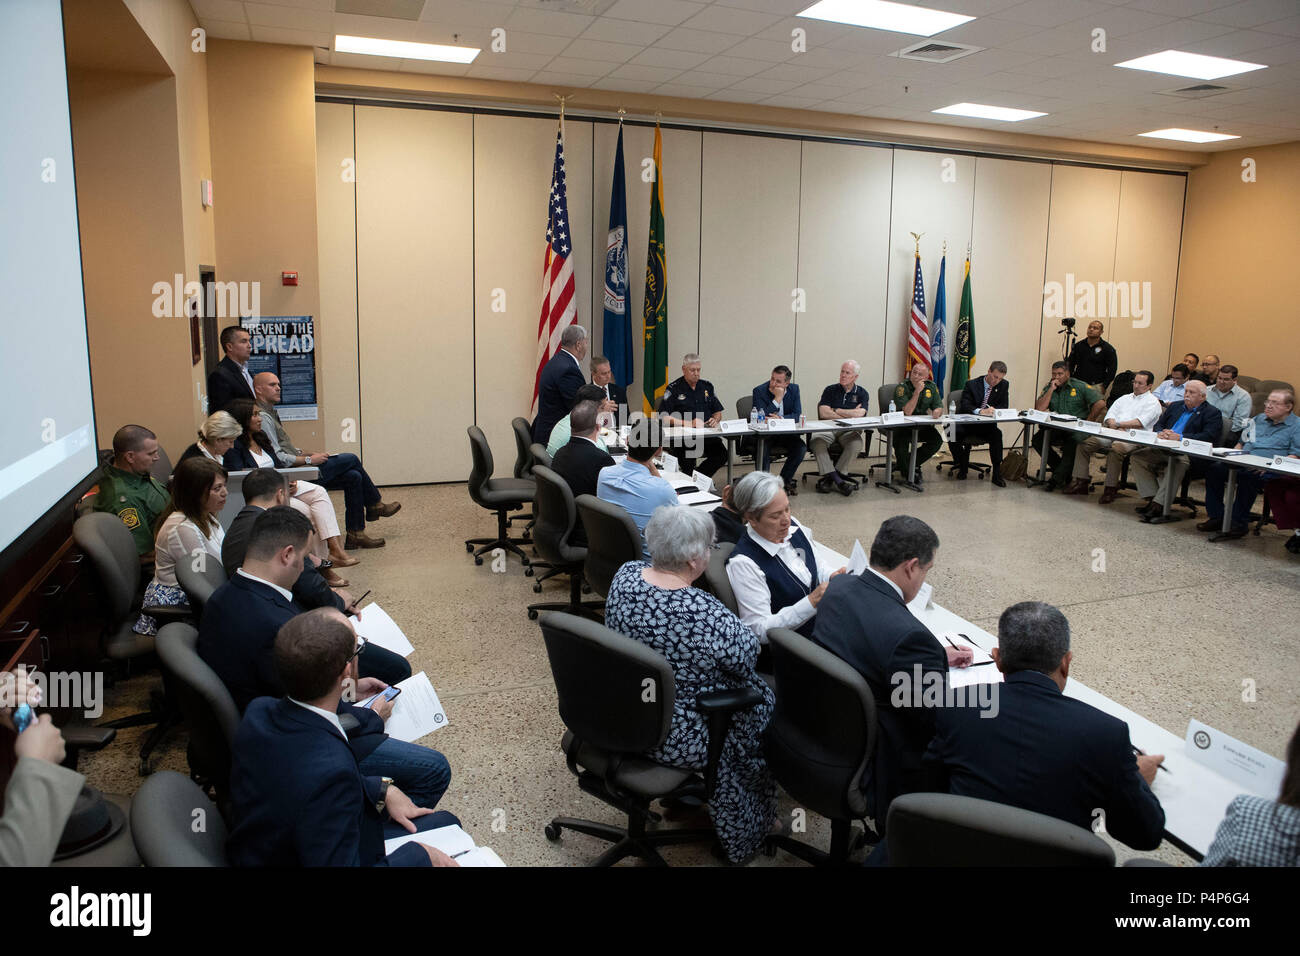 Seated between flags, U.S. Senators Ted Cruz, left, and John Cornyn listen as federal and Texas officials and stakeholders meet in a round-table discussion of the immigration crisis hitting the Texas-Mexico border. Confusion and public outrage reigned regarding the Trump administration's policy of separating undocumented immigrant parents from their children after crossing into the U.S. from Mexico. Stock Photo